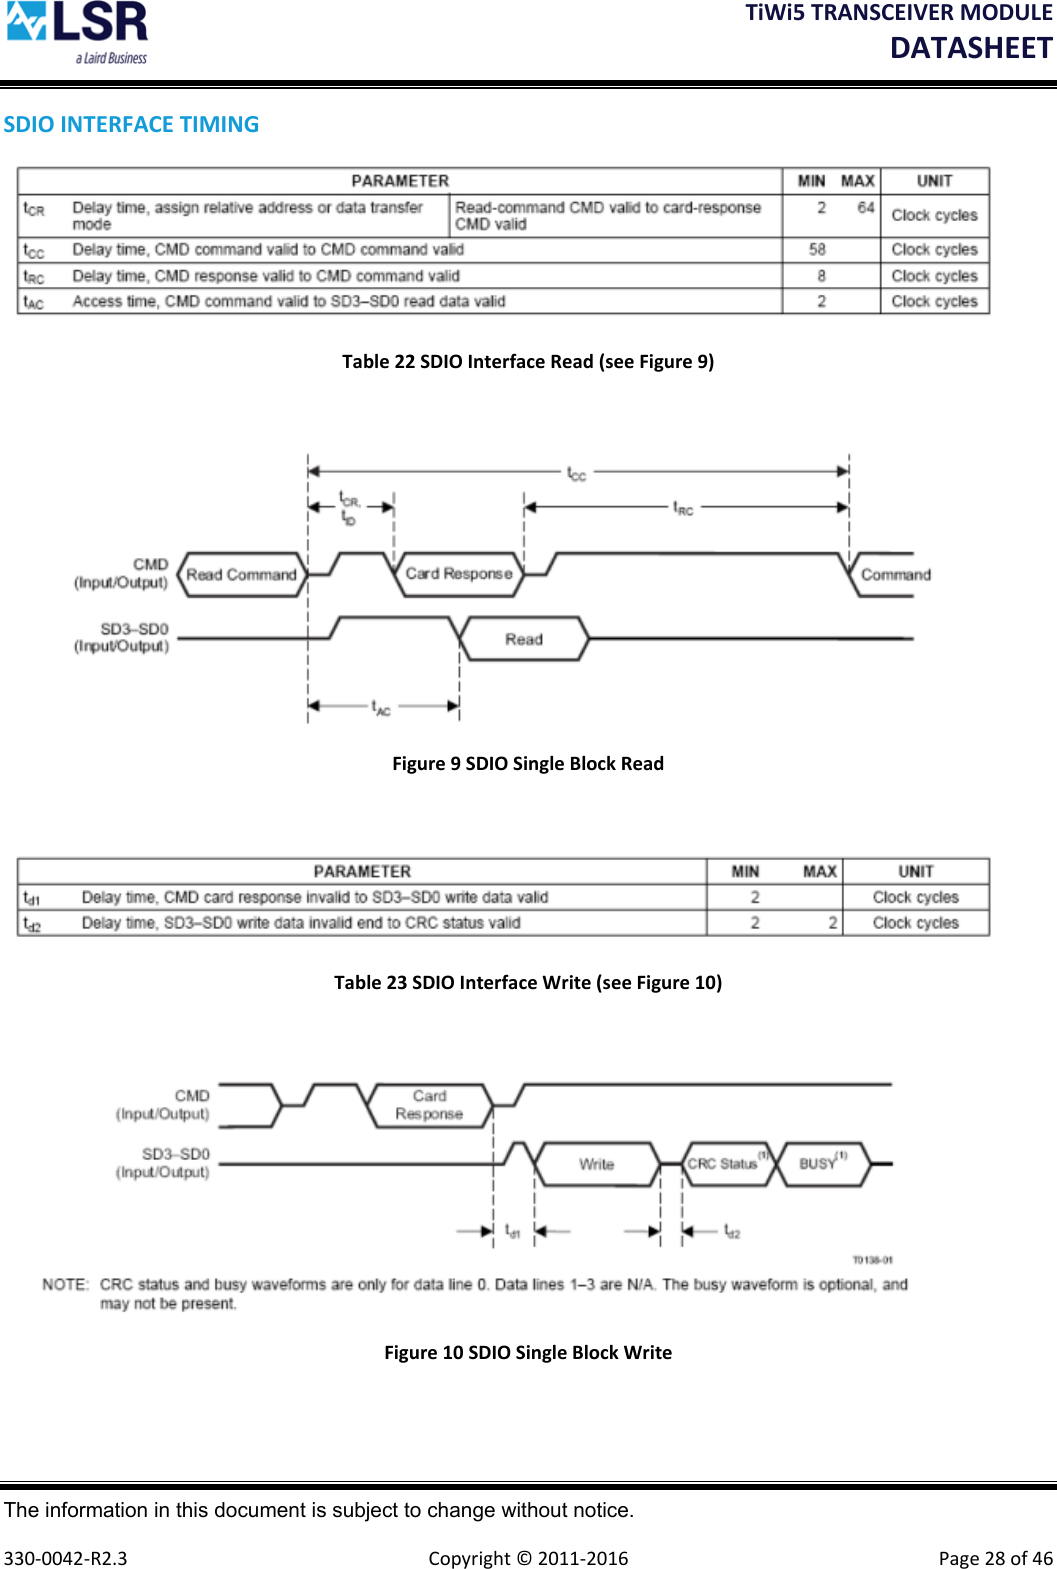 TiWi5TRANSCEIVERMODULEDATASHEET The information in this document is subject to change without notice.  330‐0042‐R2.3  Copyright©2011‐2016 Page28of46SDIOINTERFACETIMINGTable22SDIOInterfaceRead(seeFigure9)Figure9SDIOSingleBlockReadTable23SDIOInterfaceWrite(seeFigure10)Figure10SDIOSingleBlockWrite